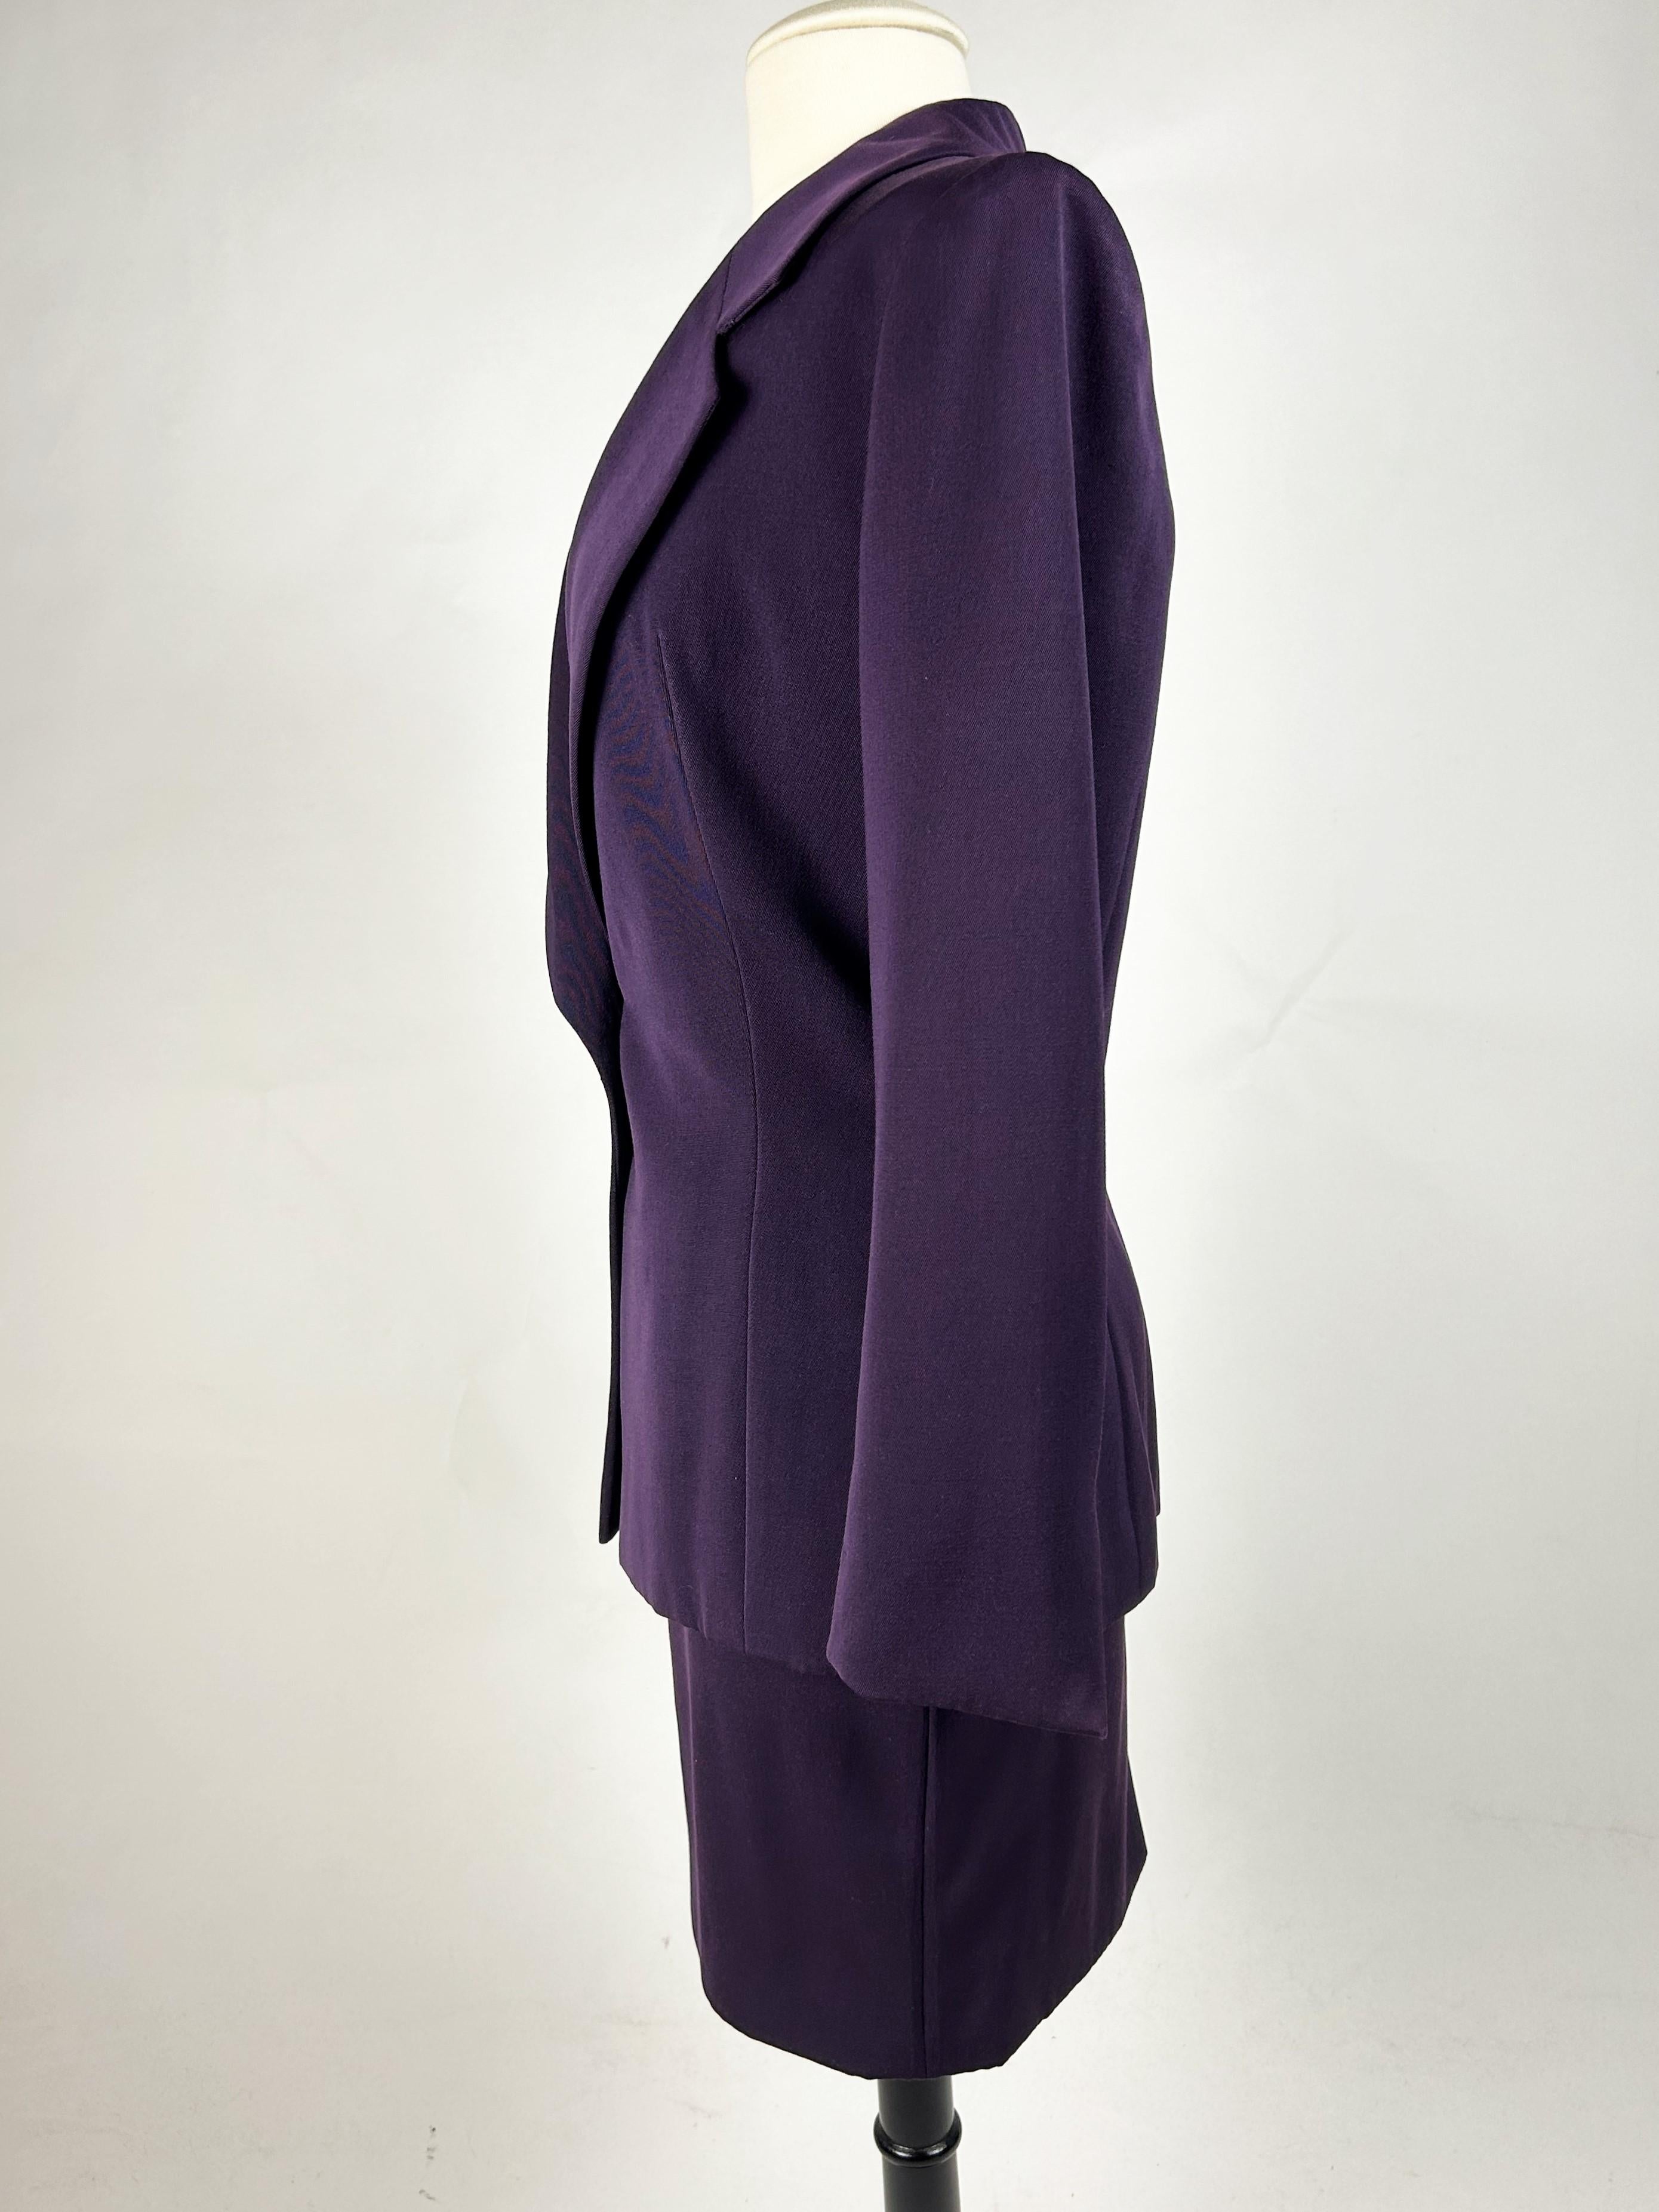 Skirt suit by Gianfranco Ferré for Christian Dior Haute Couture Circa 1995 For Sale 4